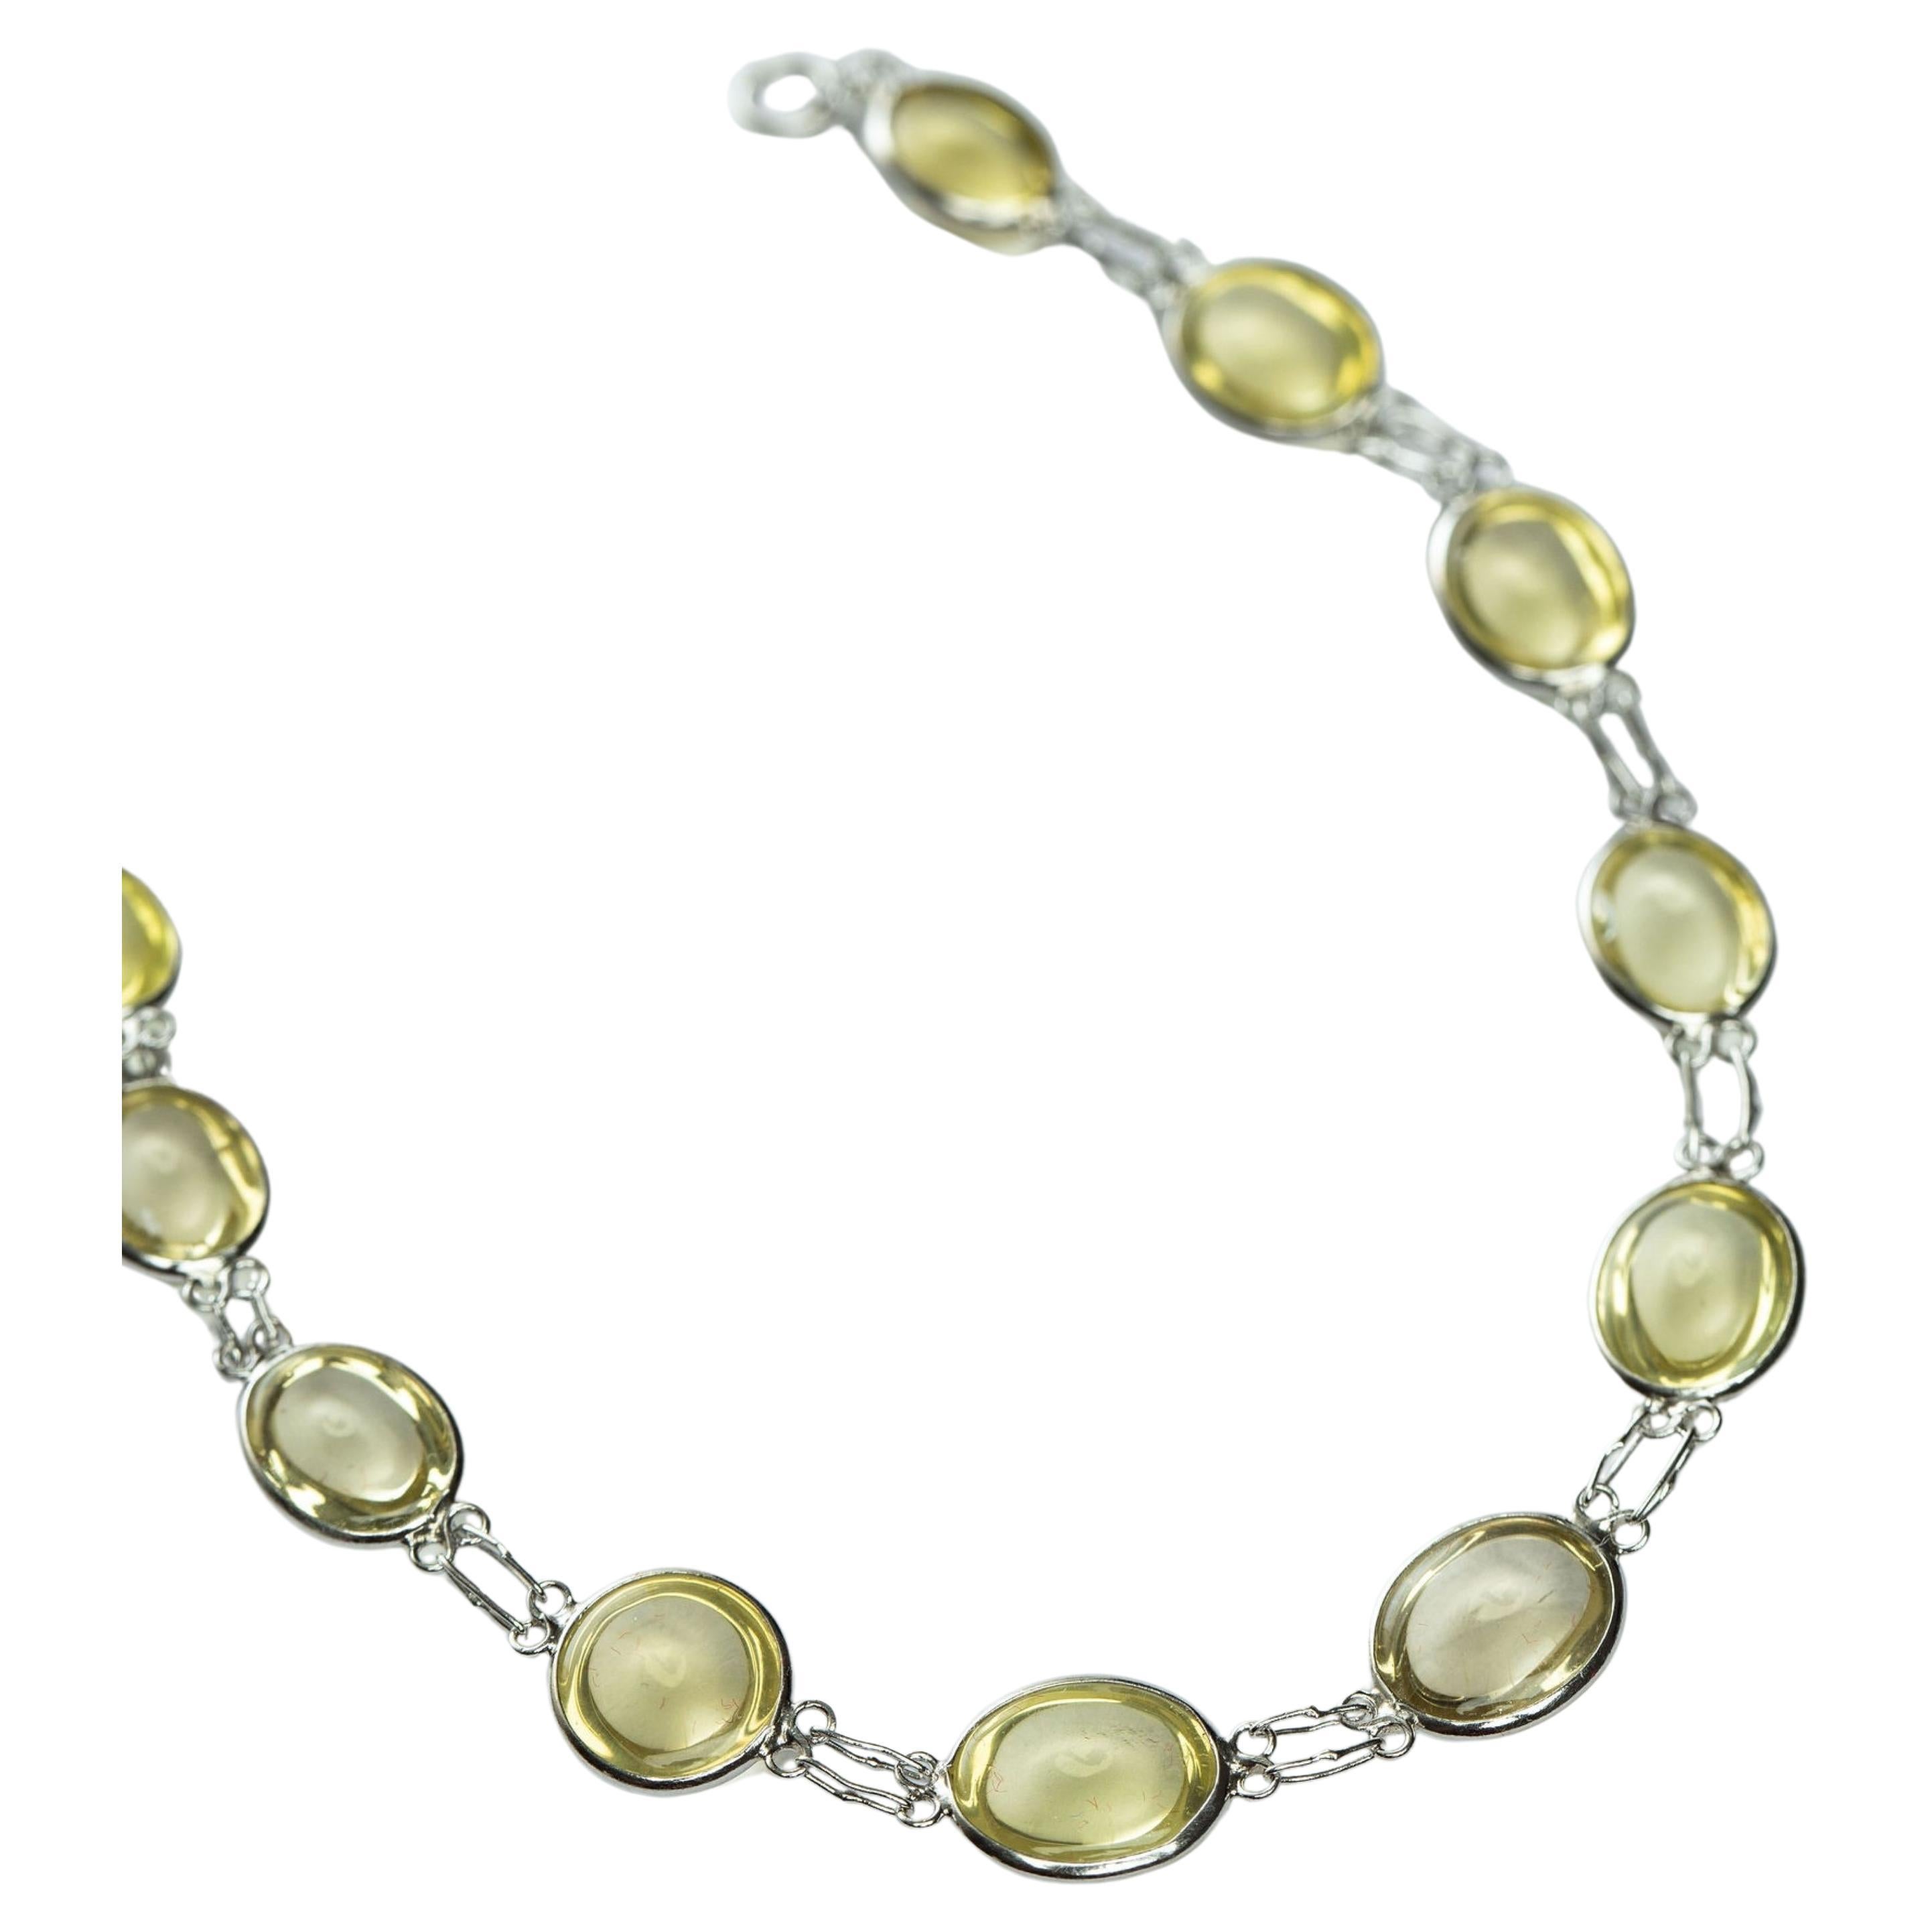 Introducing our Cabochon Yellow Citrine  Bracelet, a radiant piece of jewelry that brings the warmth and vibrancy of sunshine to your wrist. This exquisite bracelet features 11 stunning 1-carat each cabochon-cut citrine gemstones.
Citrine is known